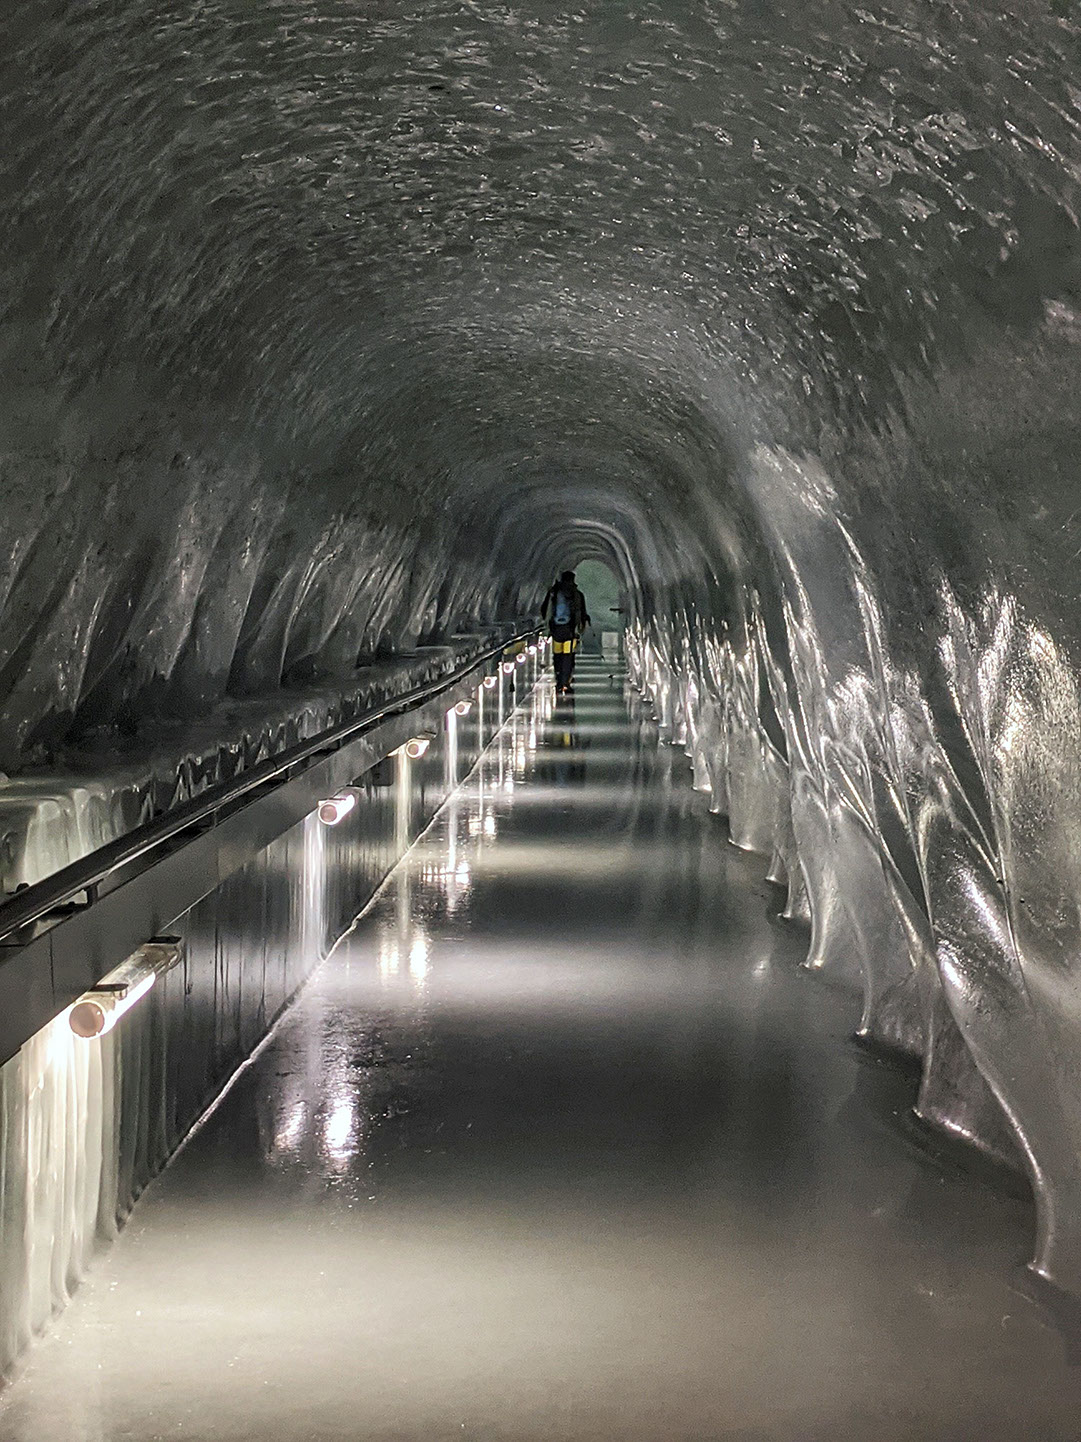 The tunnels in the Ice Palace Jungfraujoch showcase spectacular works of artists